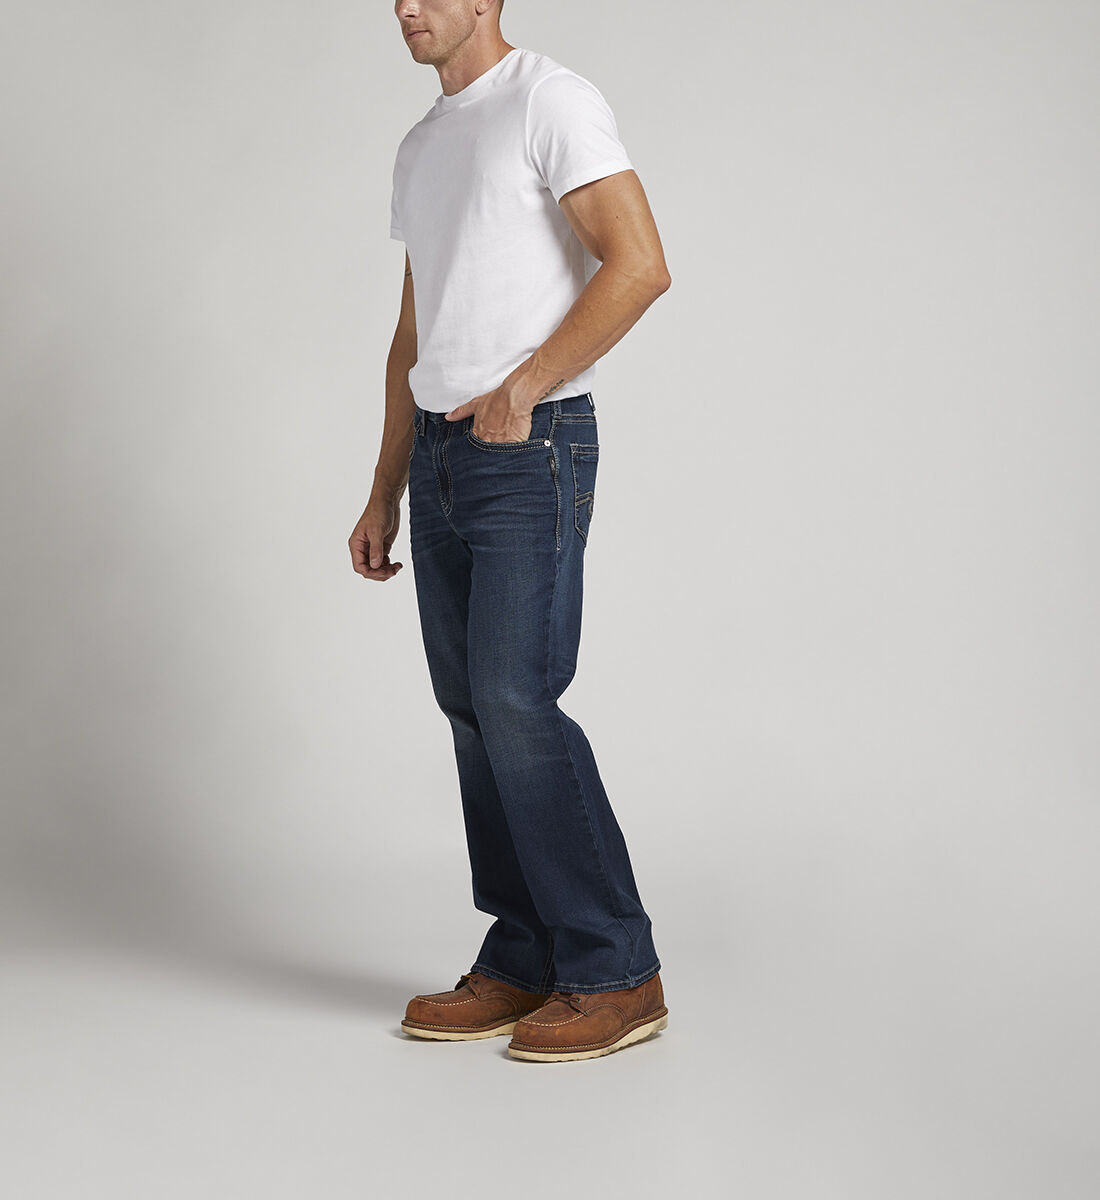 Buy Craig Classic Fit Bootcut Jeans for USD .   Silver Jeans